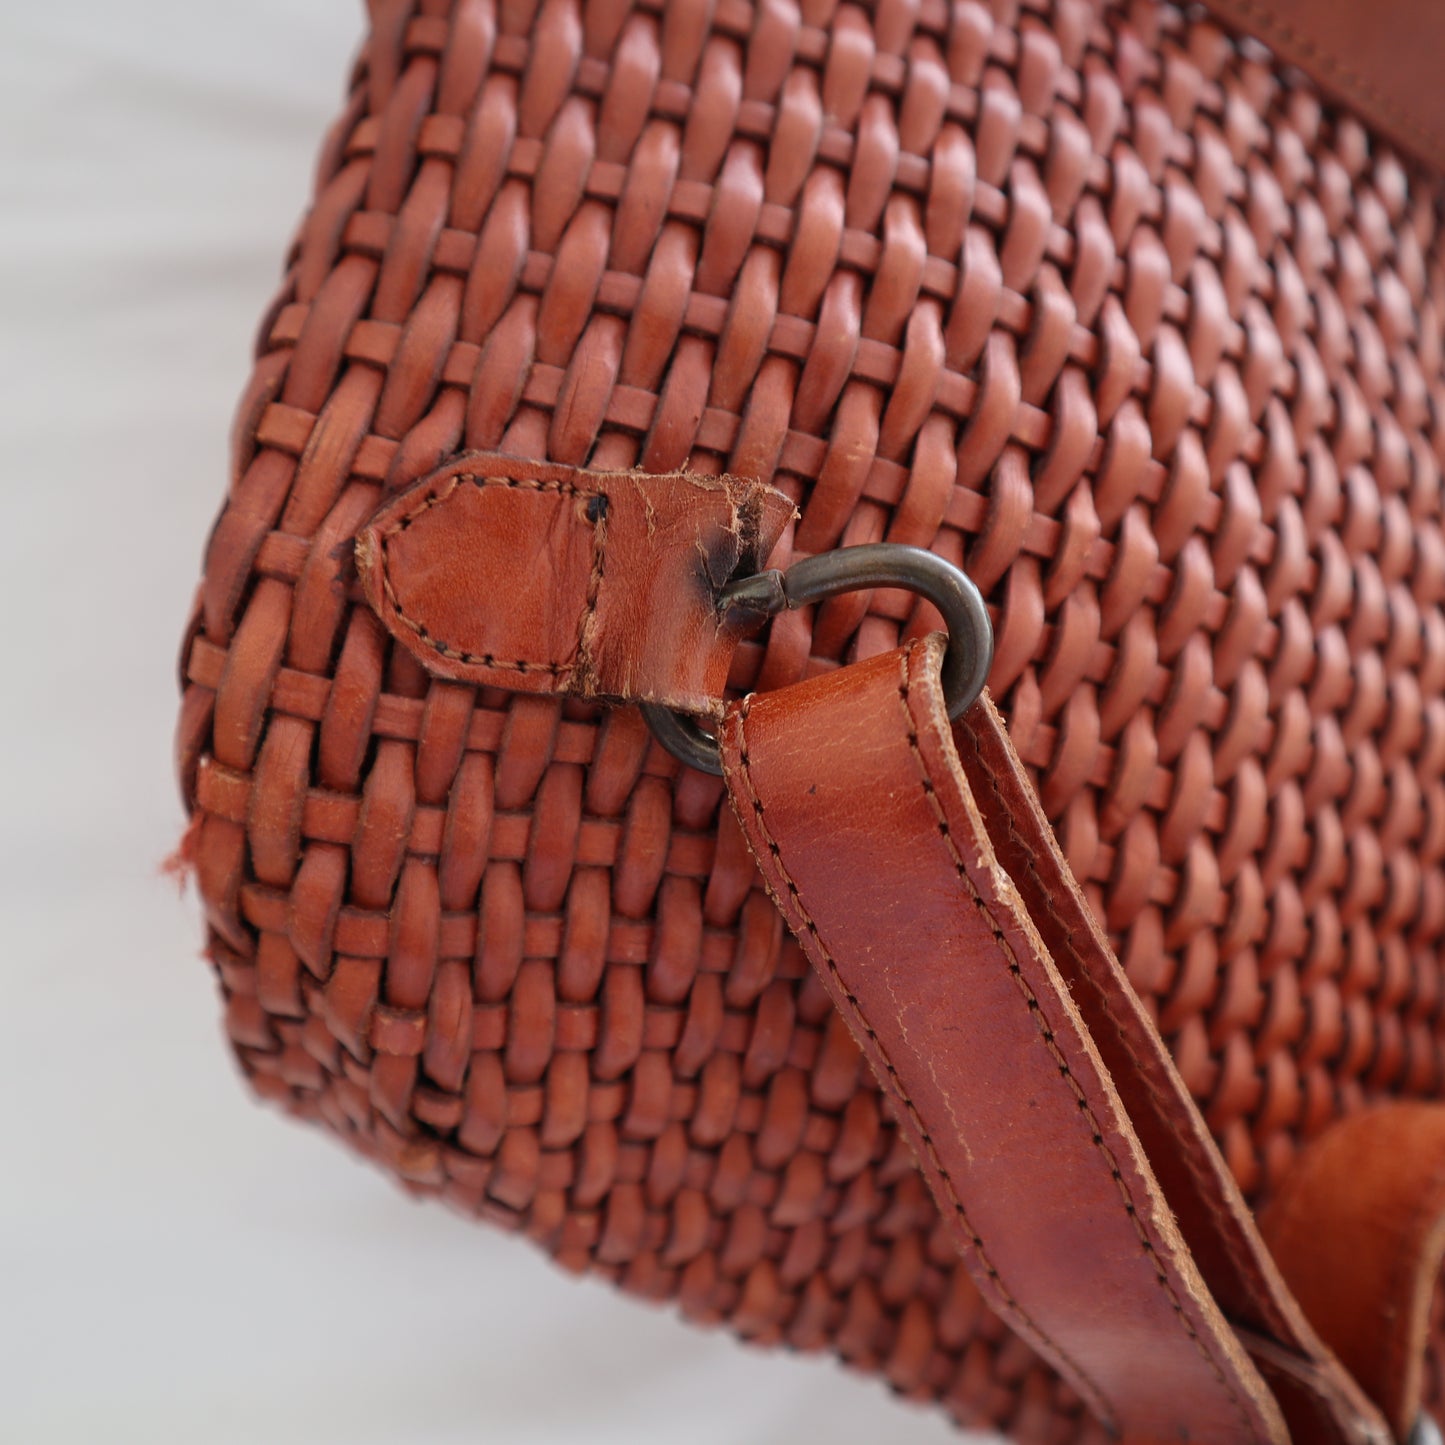 New Accessories: Genuine Leather Woven Backpack - Thrift Happens 2